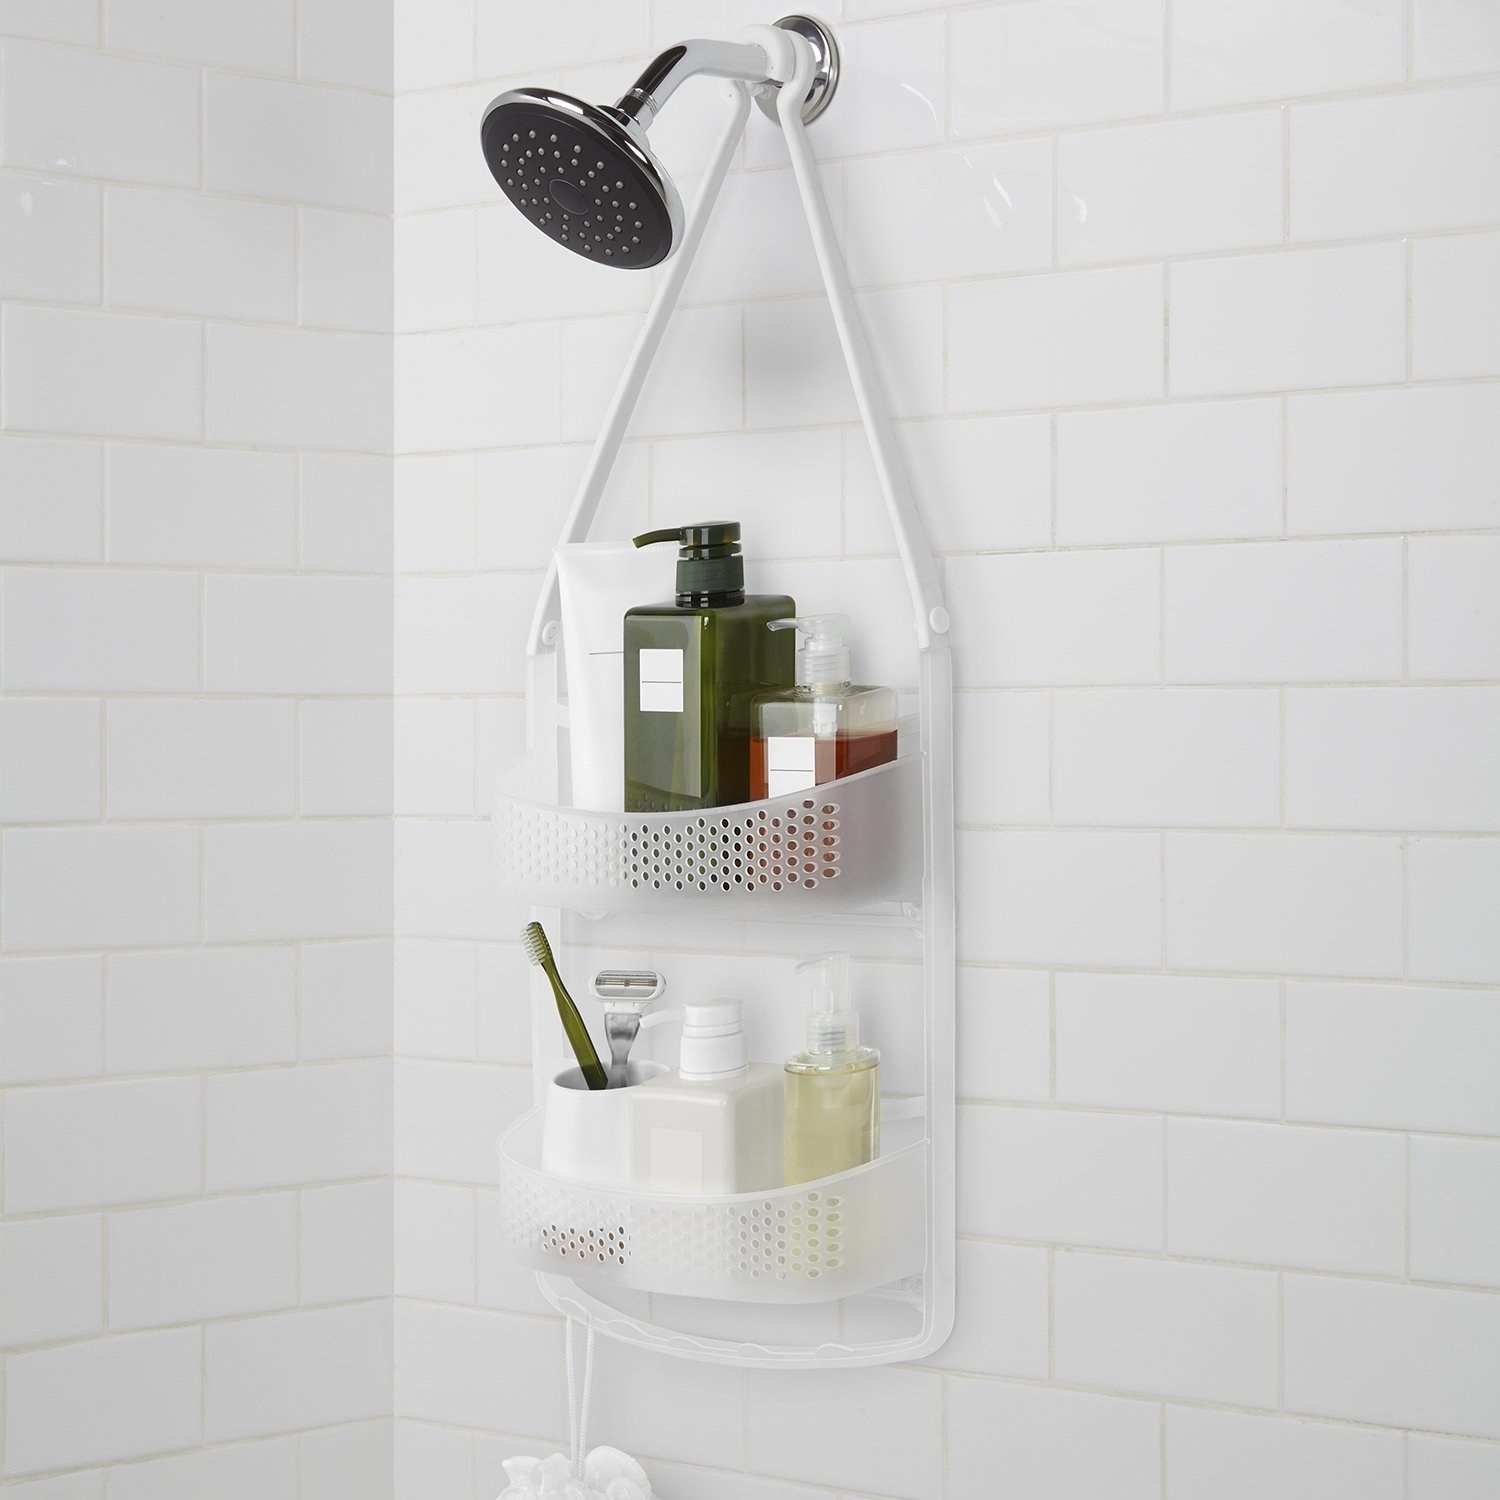 A caddy hung on a showerhead with toiletries in it